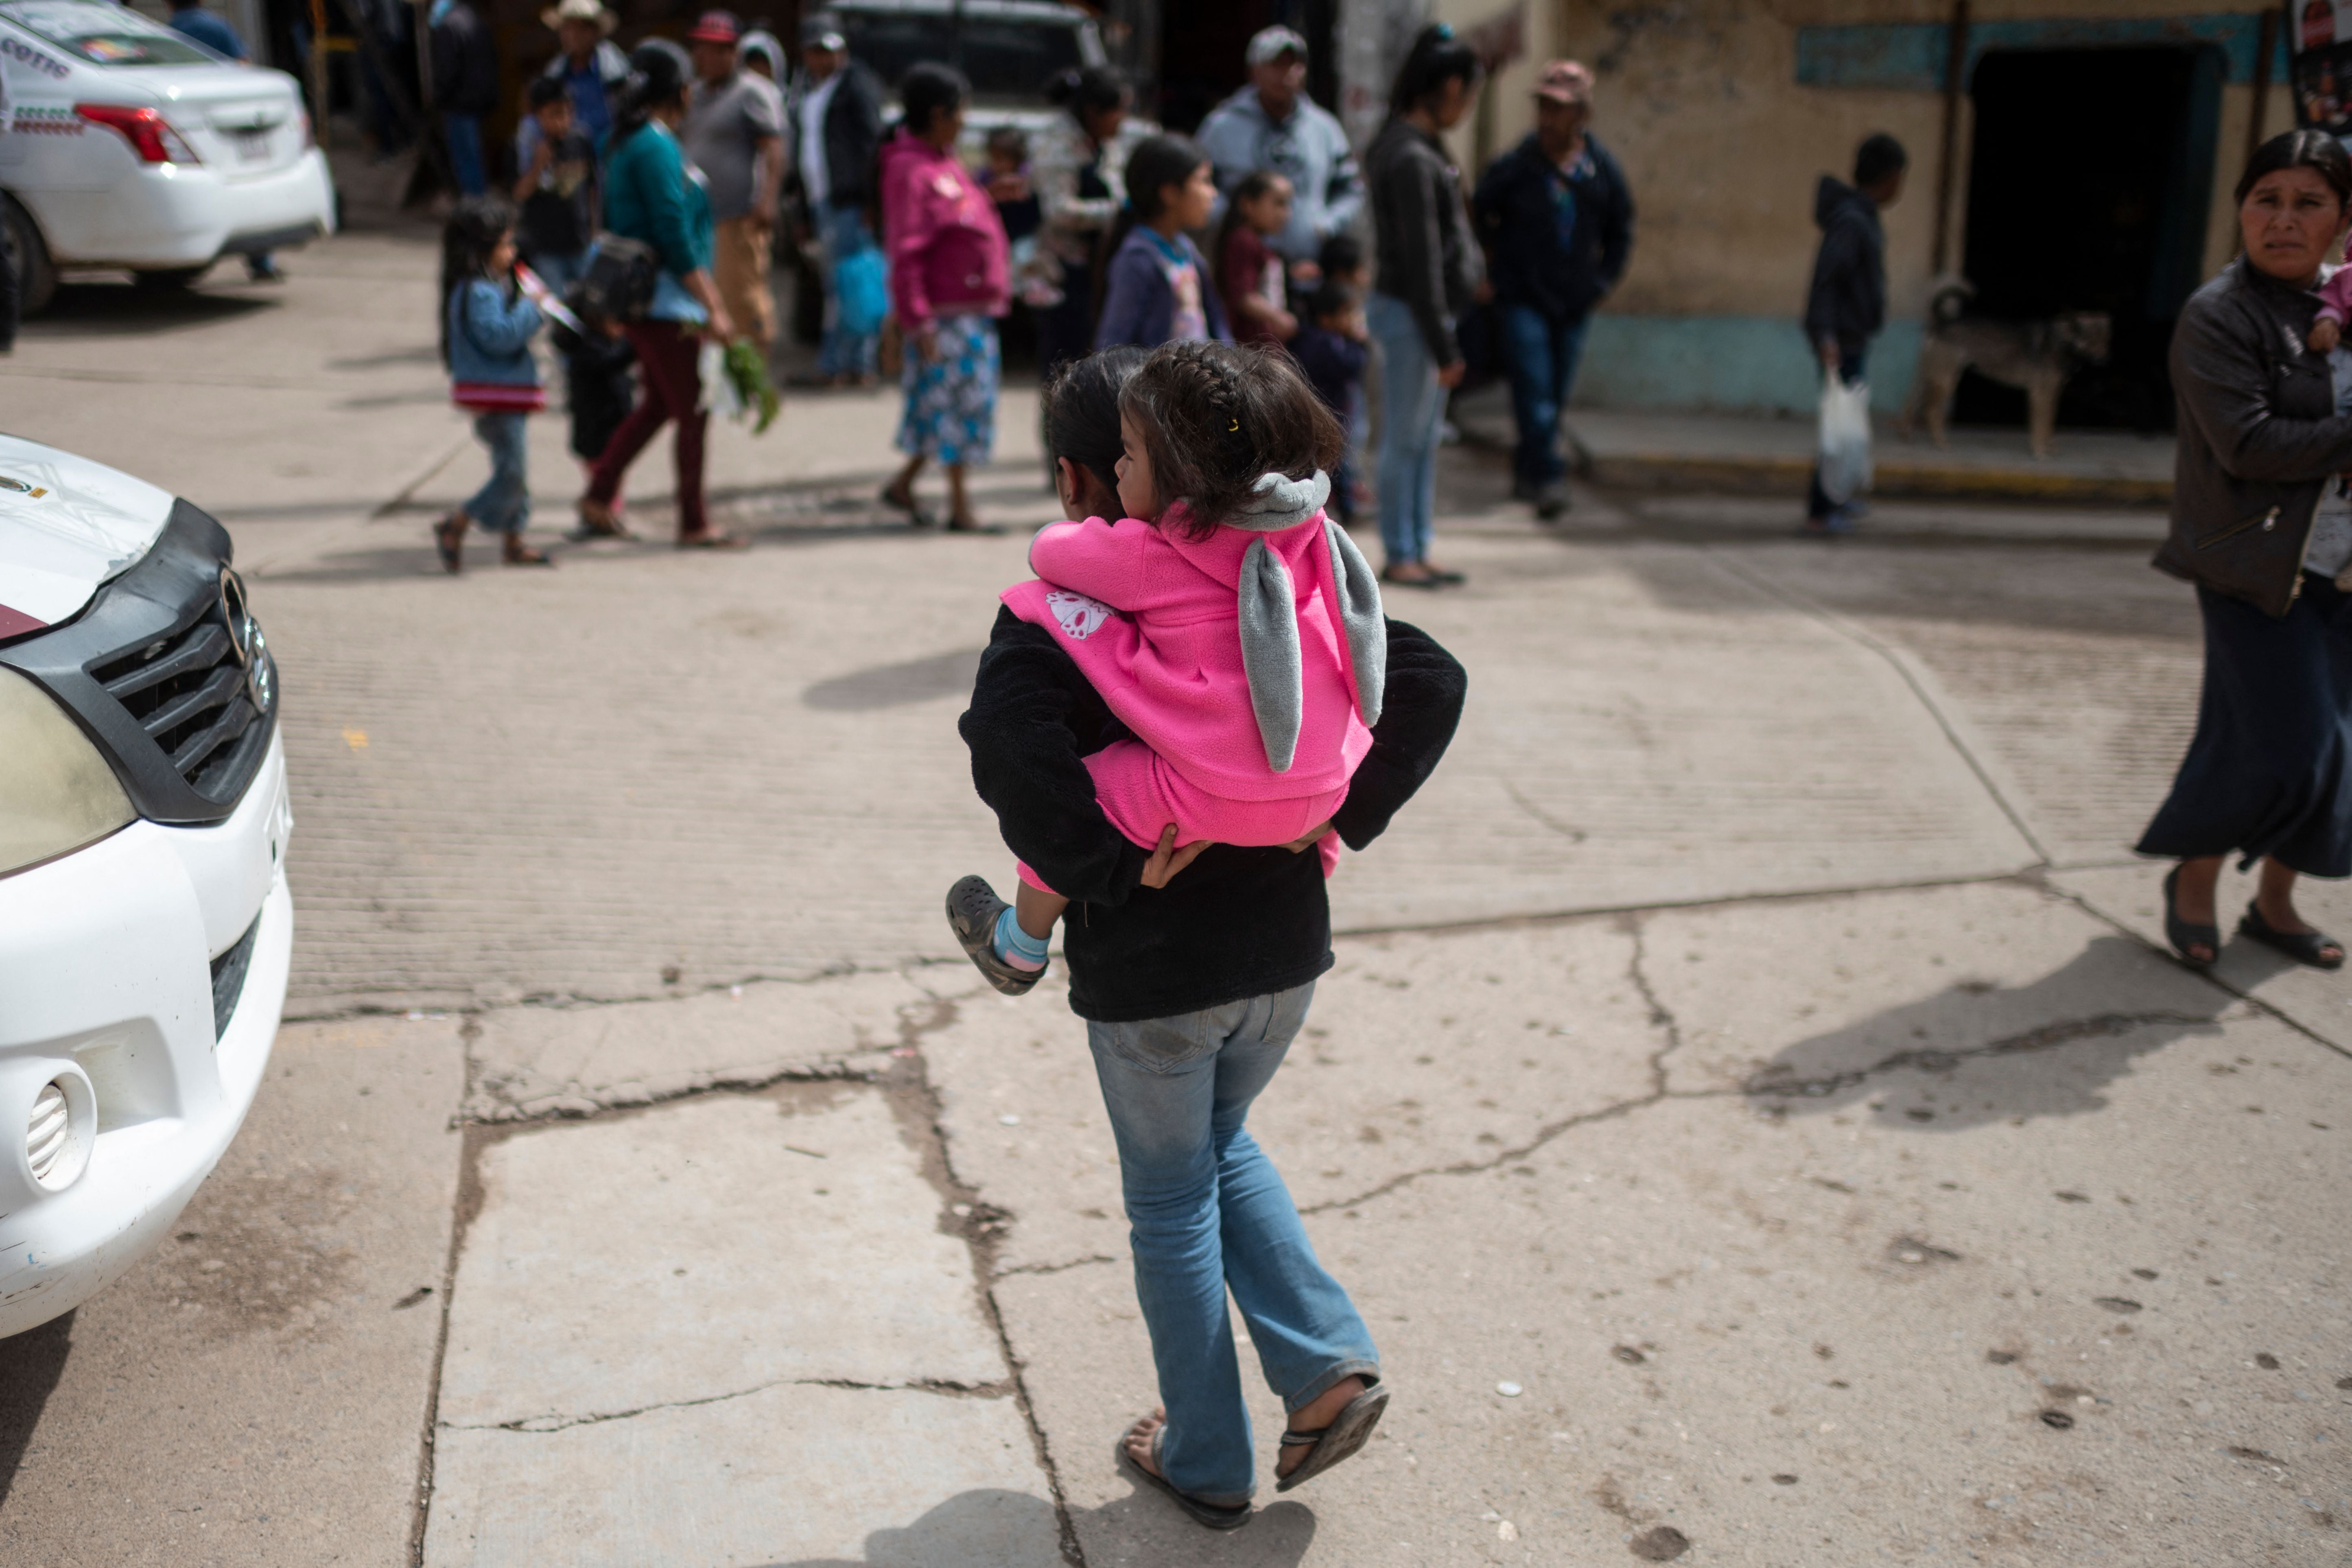 File image: A woman carries a child in Guerrero state, Mexico, on May 16, 2021, where girls are given in marriage under an ancestral agreement of buying and selling